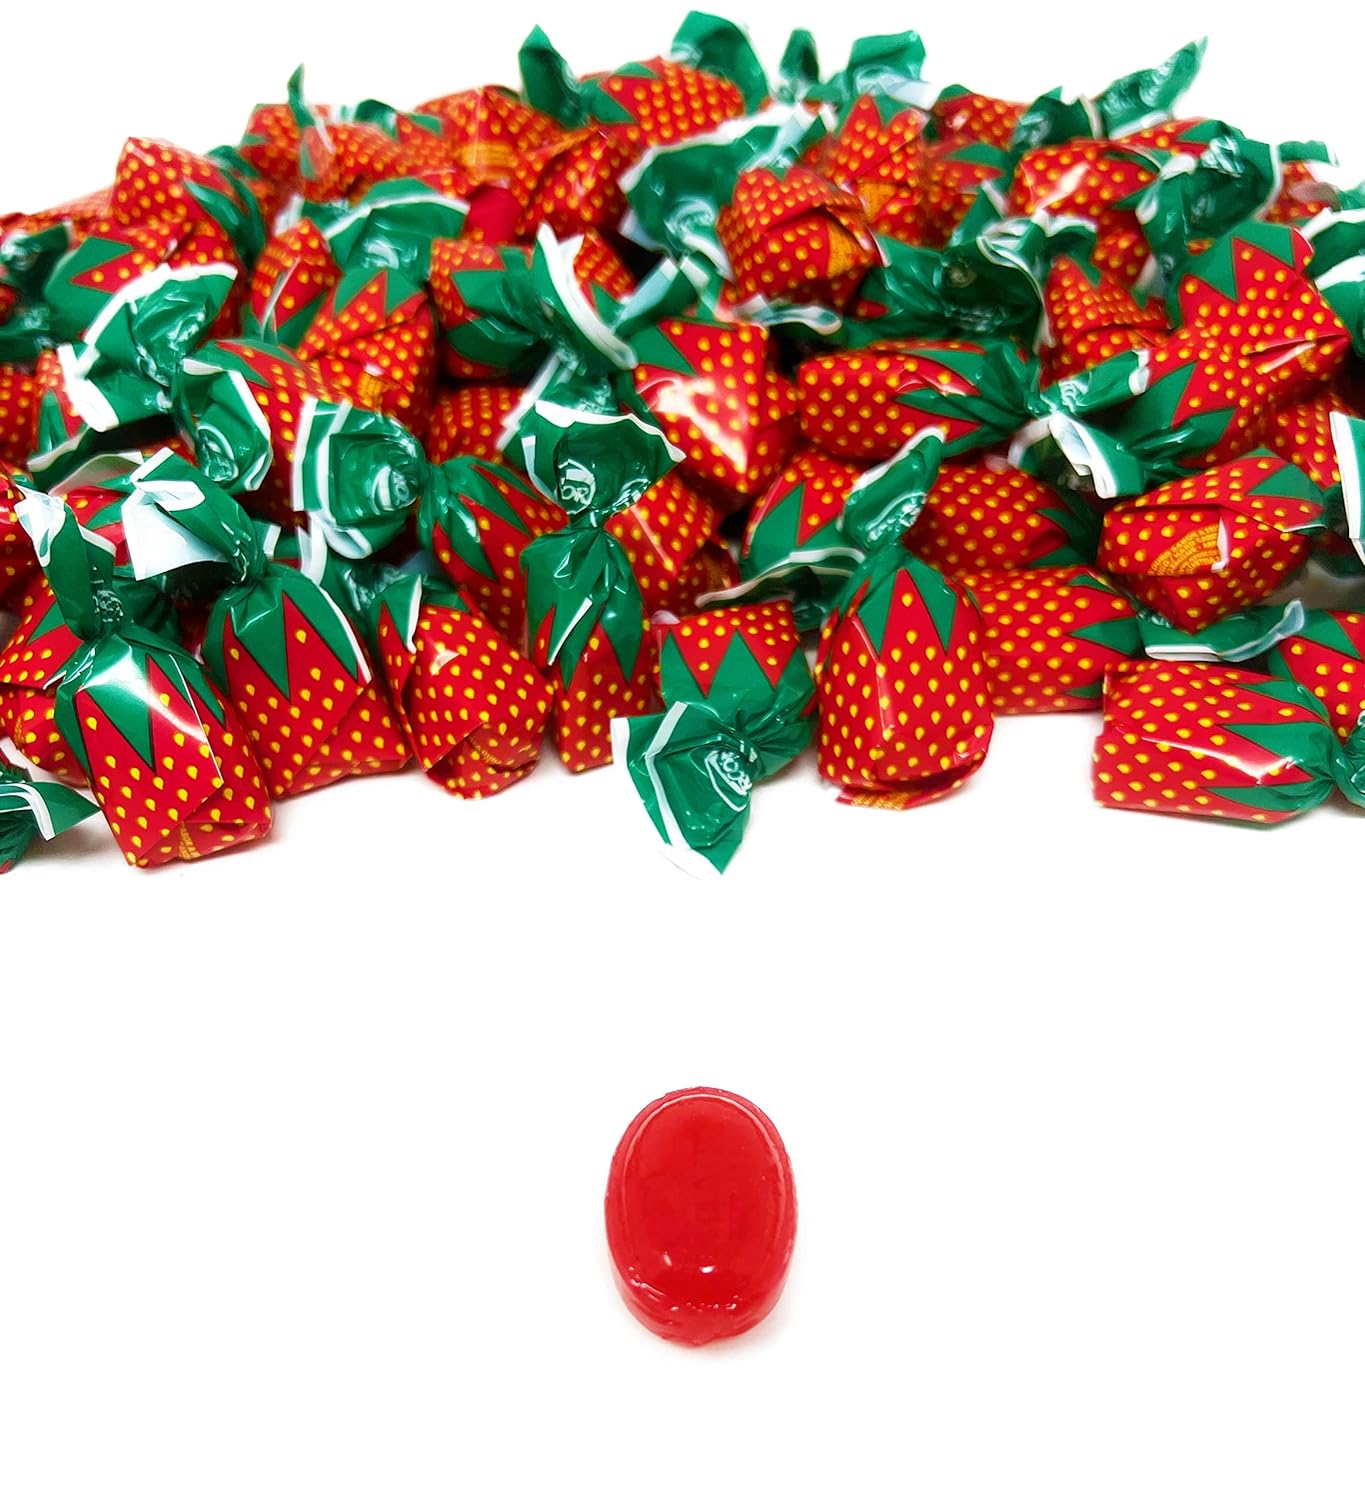 Arcor Strawberry Filled Hard Candy - 6 lbs - Strawberry Flavored Filled With Chewy Strawberry Center - Bulk 96 oz.